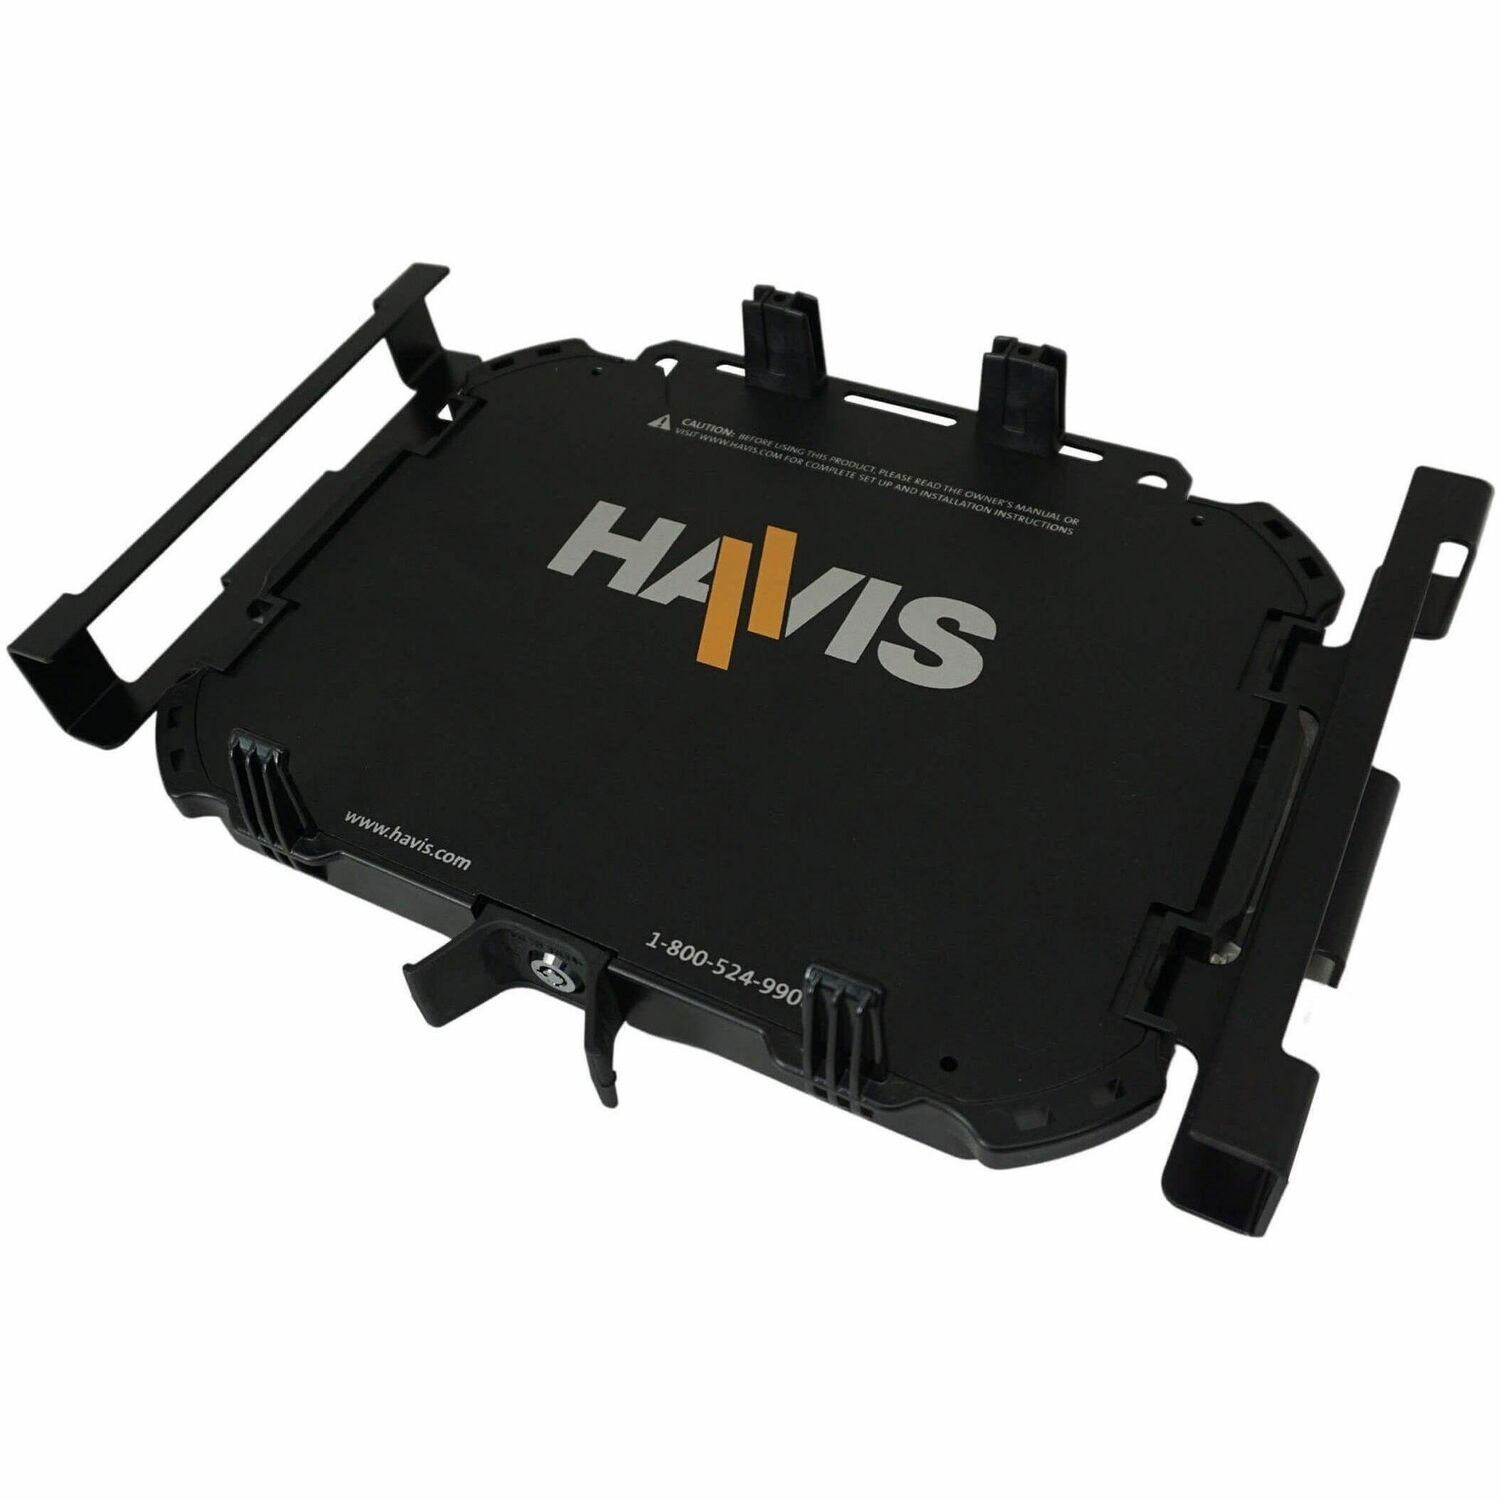 Havis Rugged Cradle For Dell 7230 And 7220 Rugged Extreme Tablet